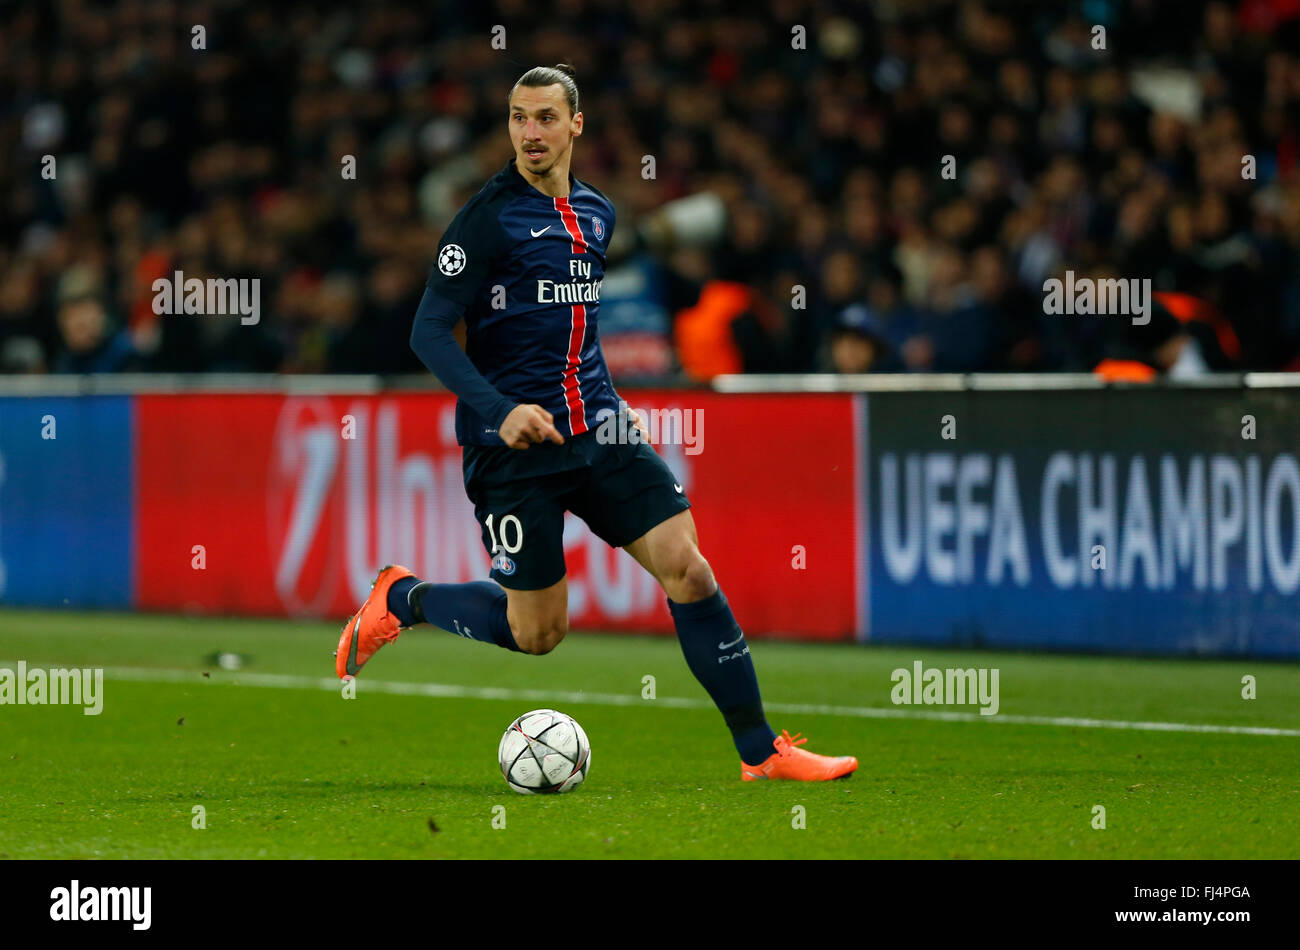 Zlatan Ibrahimovic of PSG during the UEFA Champions League round of 16 match between Paris Saint-Germain and Chelsea at the Parc des Princes Stadium in Paris. February 16, 2016. James Boardman / Telephoto Images +44 7967 642437 Stock Photo